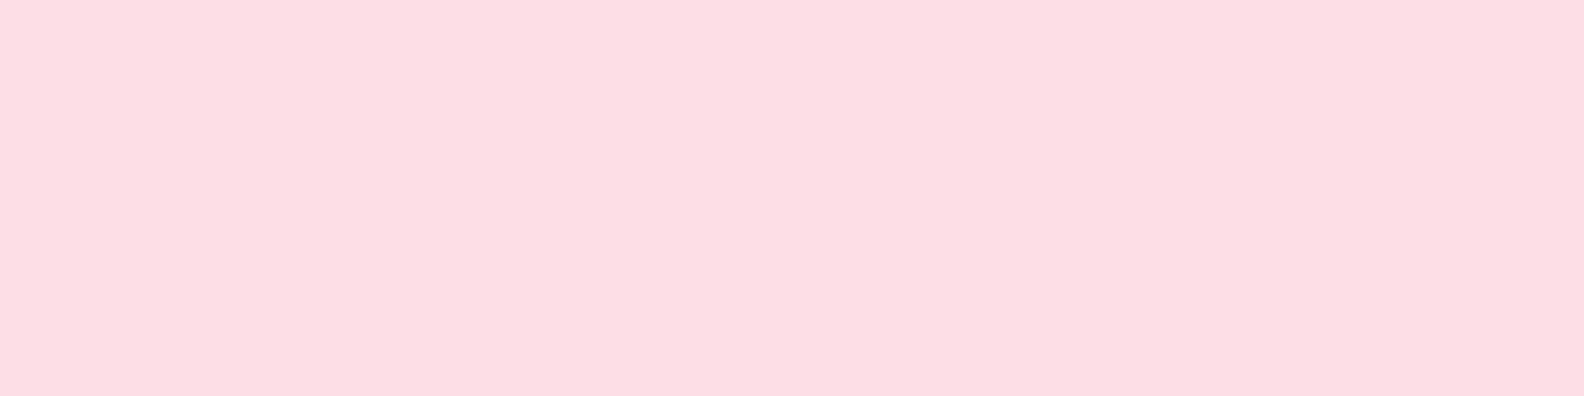 1584x396 Piggy Pink Solid Color Background